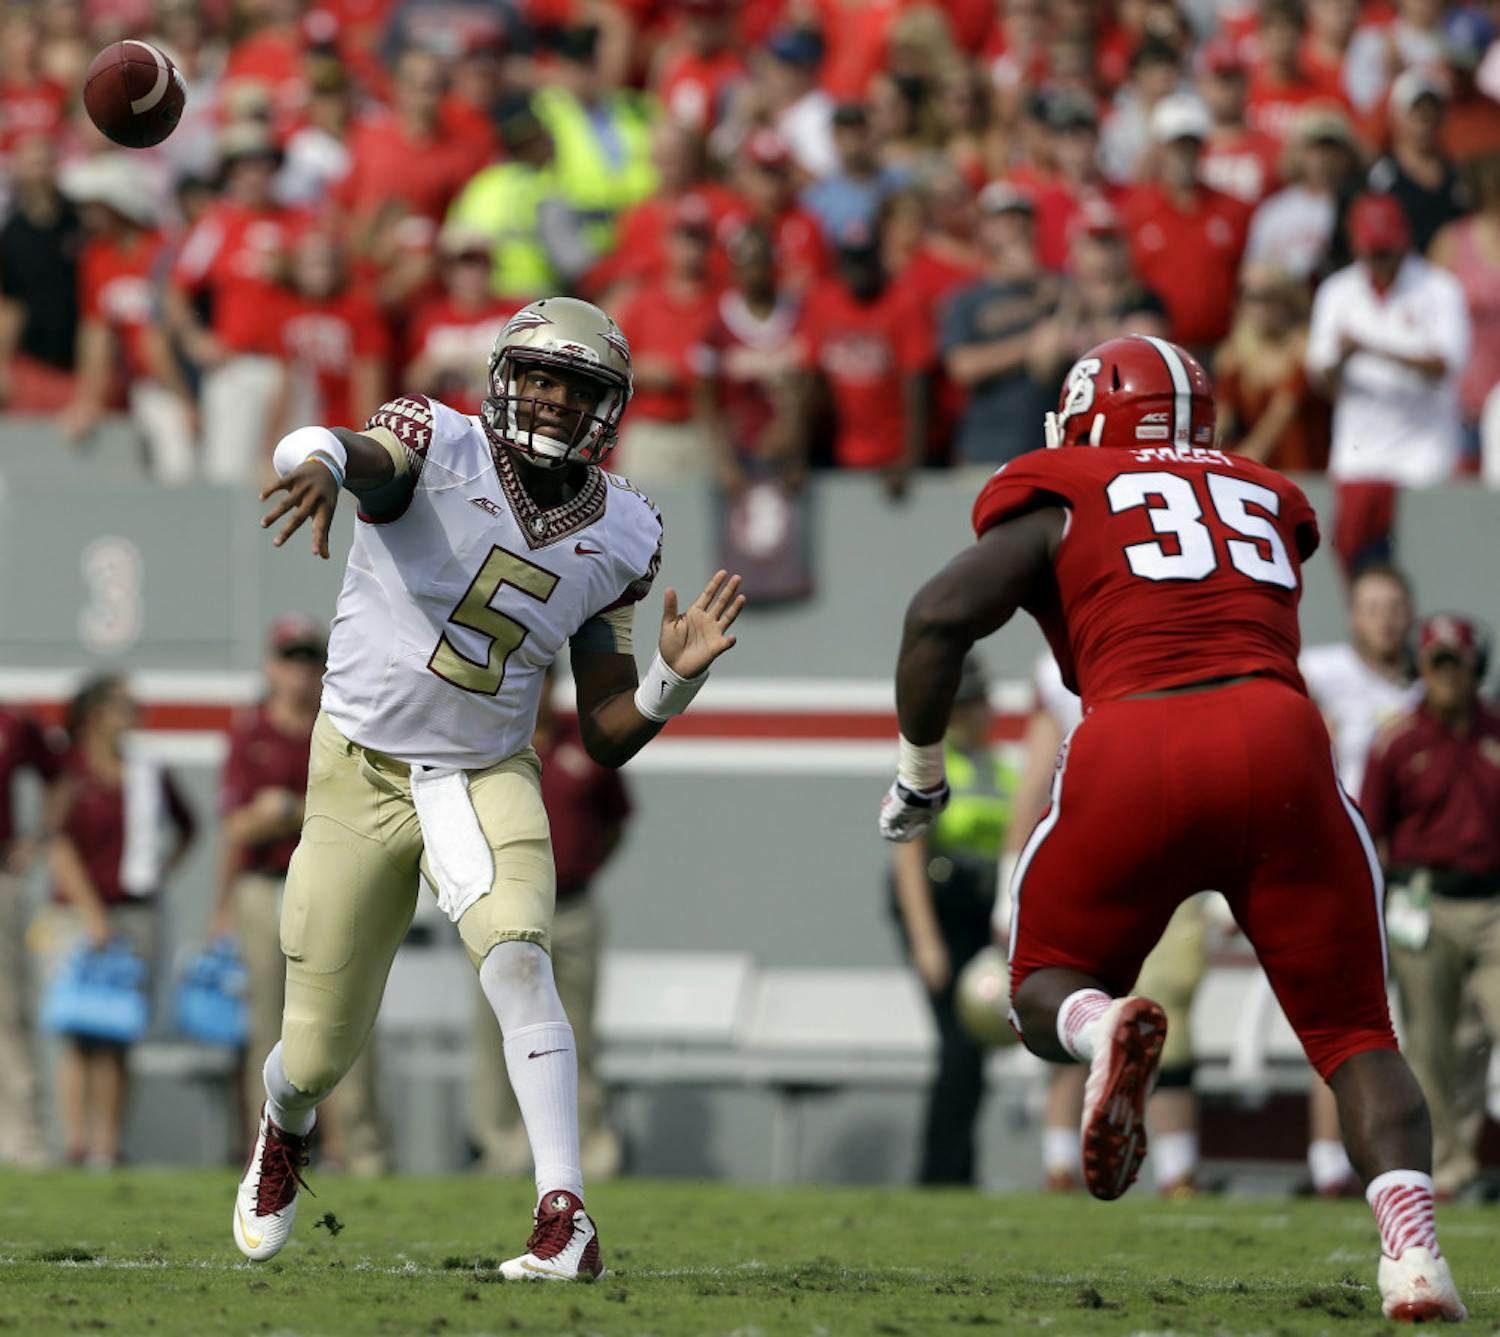 Florida State quarterback Jameis Winston (5) throws a pass as North Carolina State's Kentavius Street (35) rushes during the first half of an NCAA college football game in Raleigh, N.C., Saturday, Sept. 27, 2014.